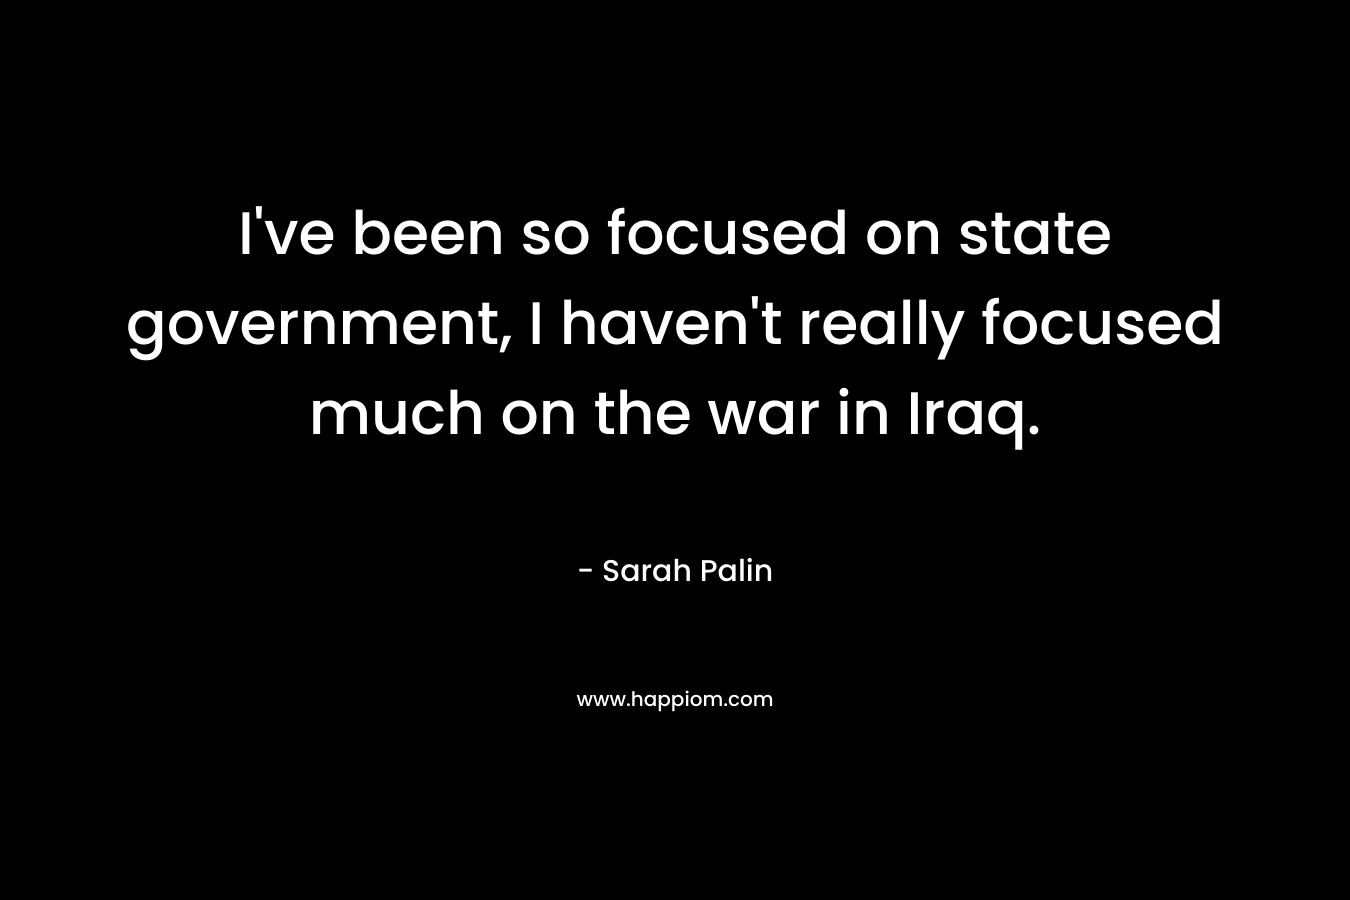 I’ve been so focused on state government, I haven’t really focused much on the war in Iraq. – Sarah Palin